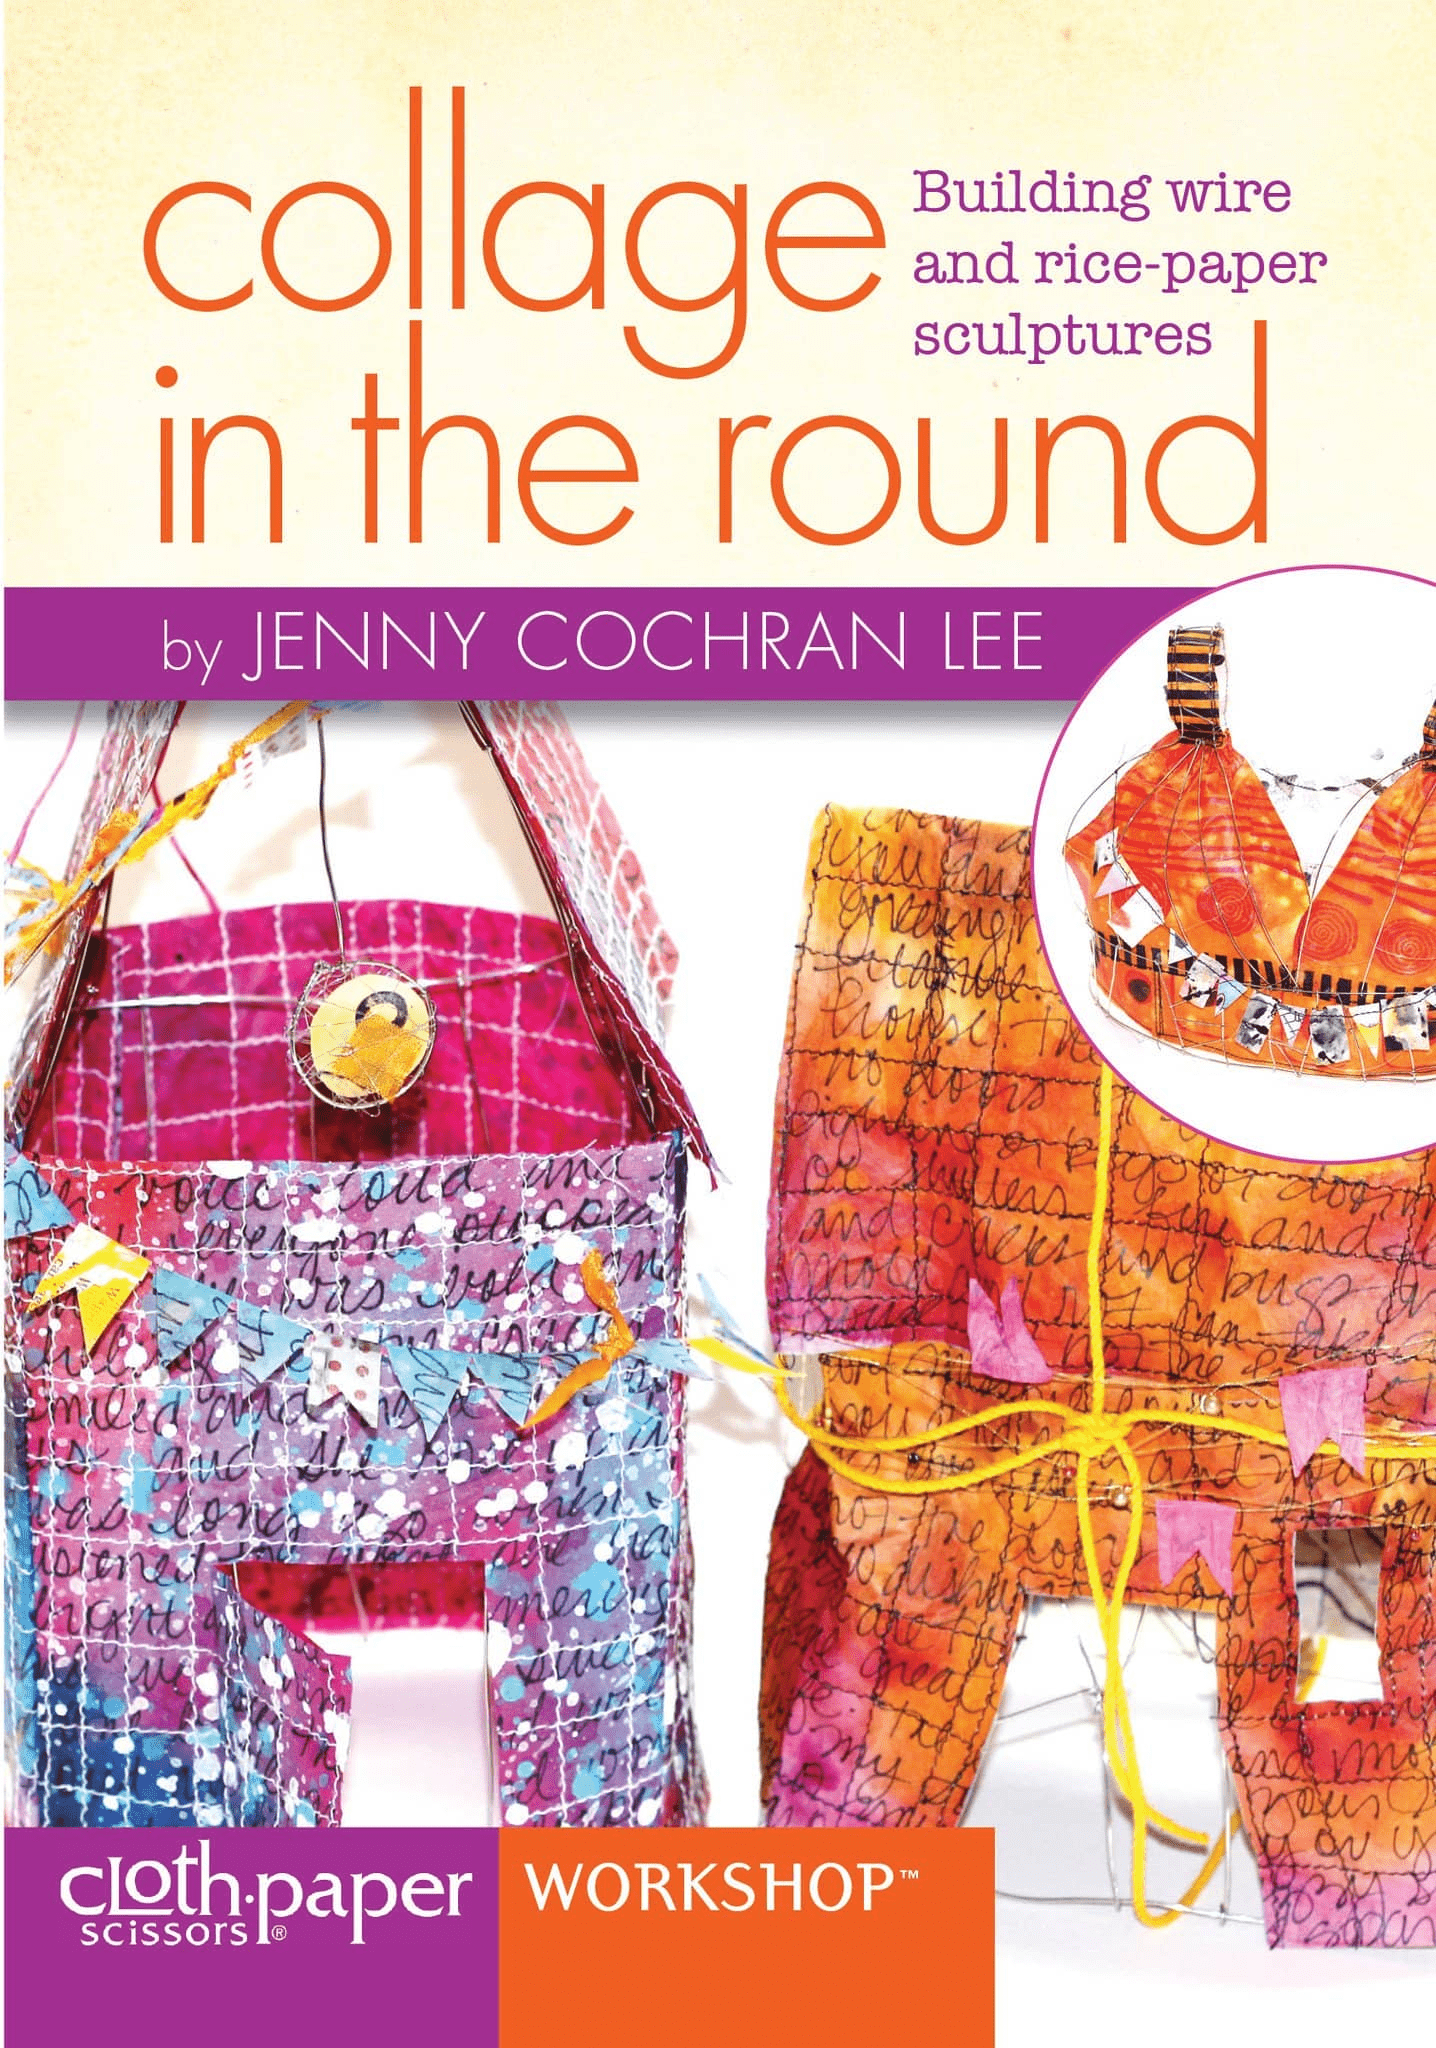 Jenny Cochran Lee: Collage in the Round